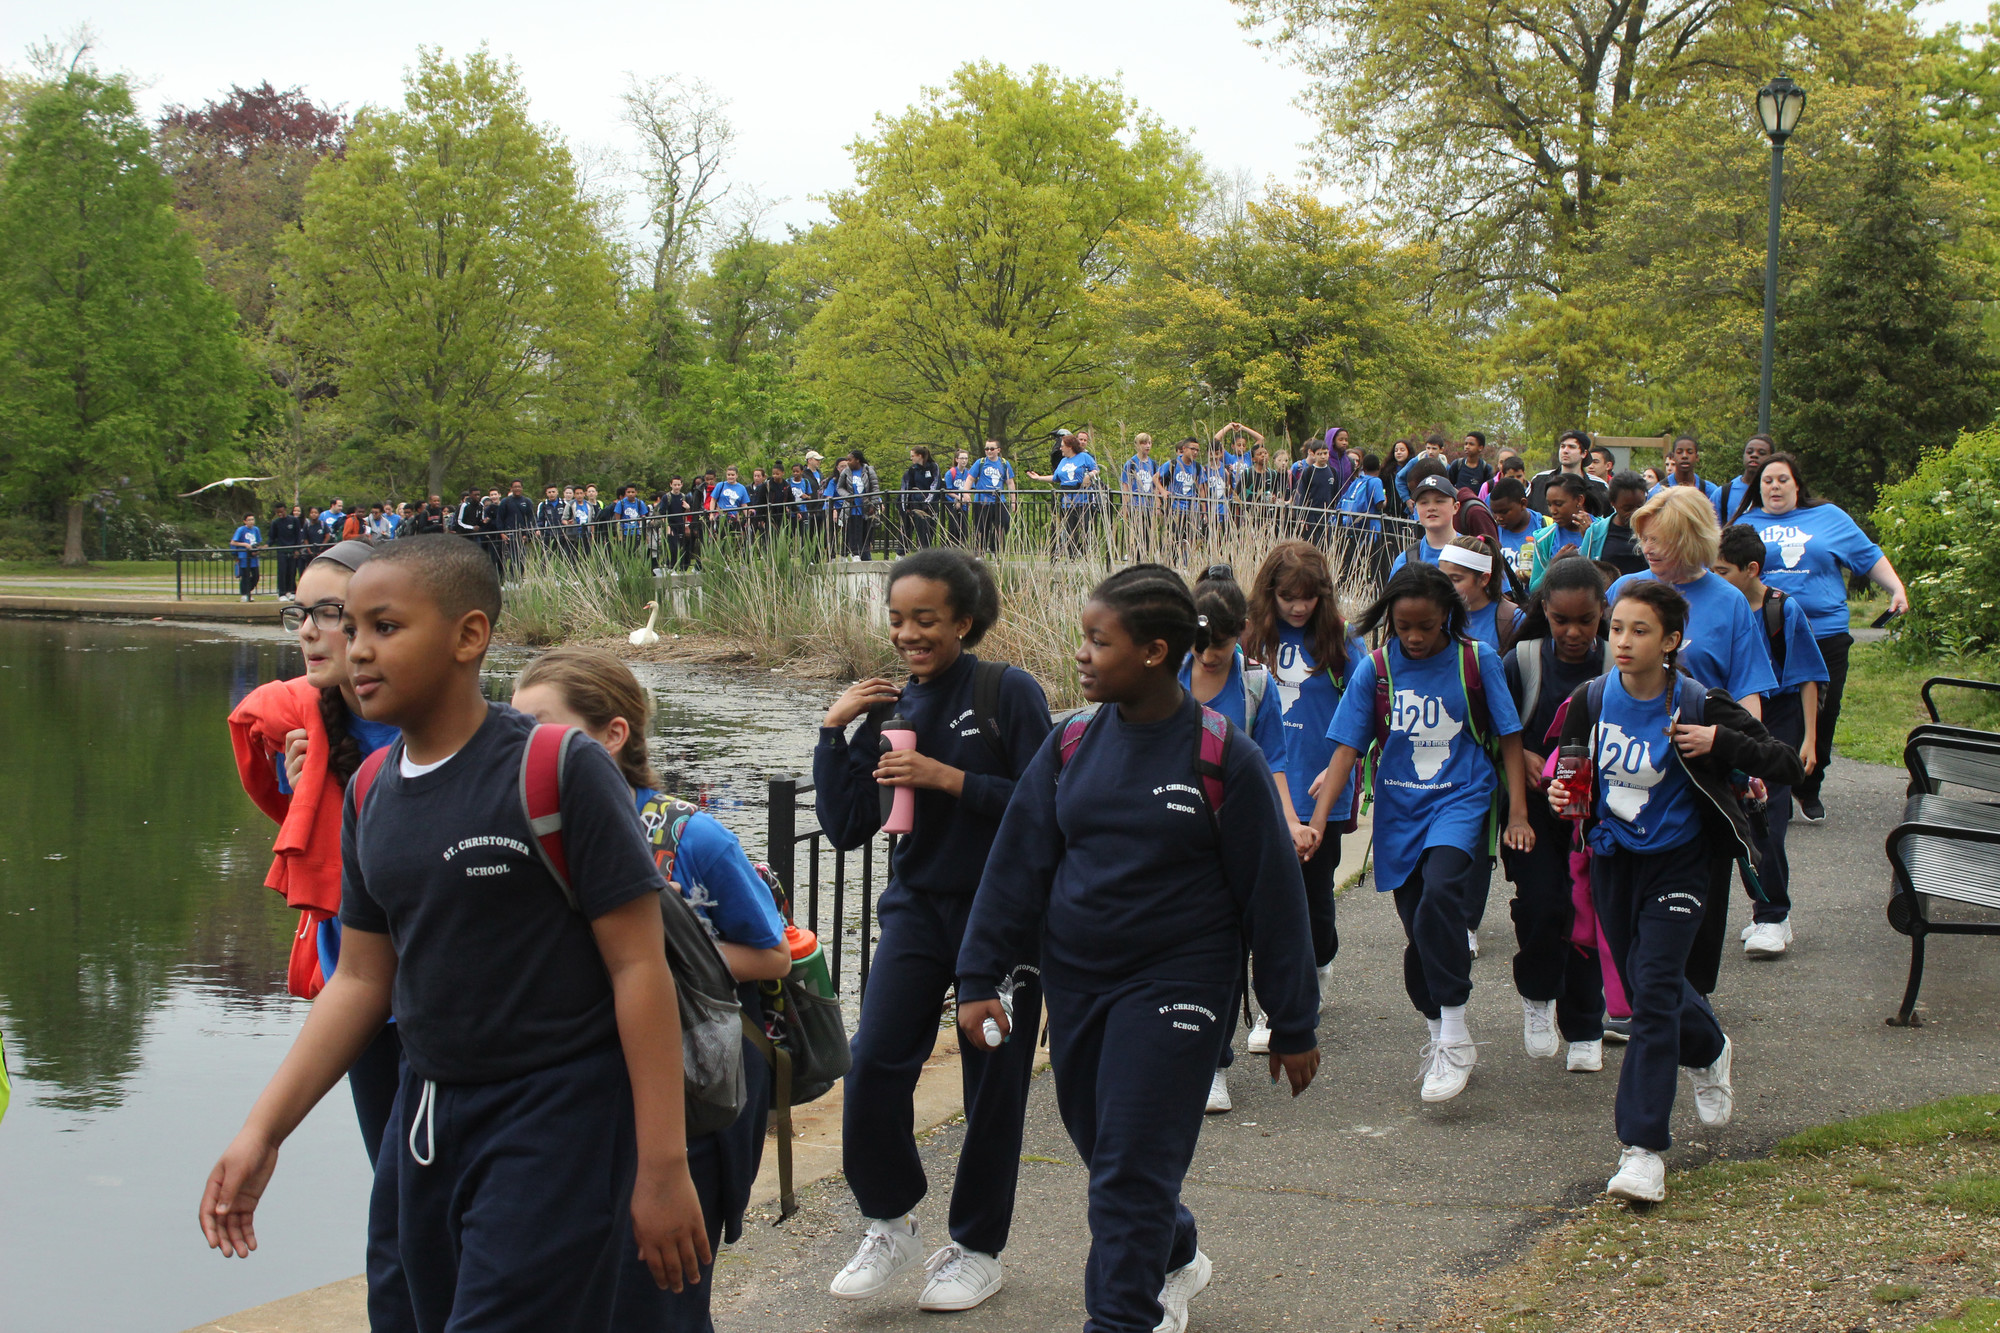 Students walked from their school to Silver Lake Park and back to raise awareness for third world countries with poor access to drinkable water.